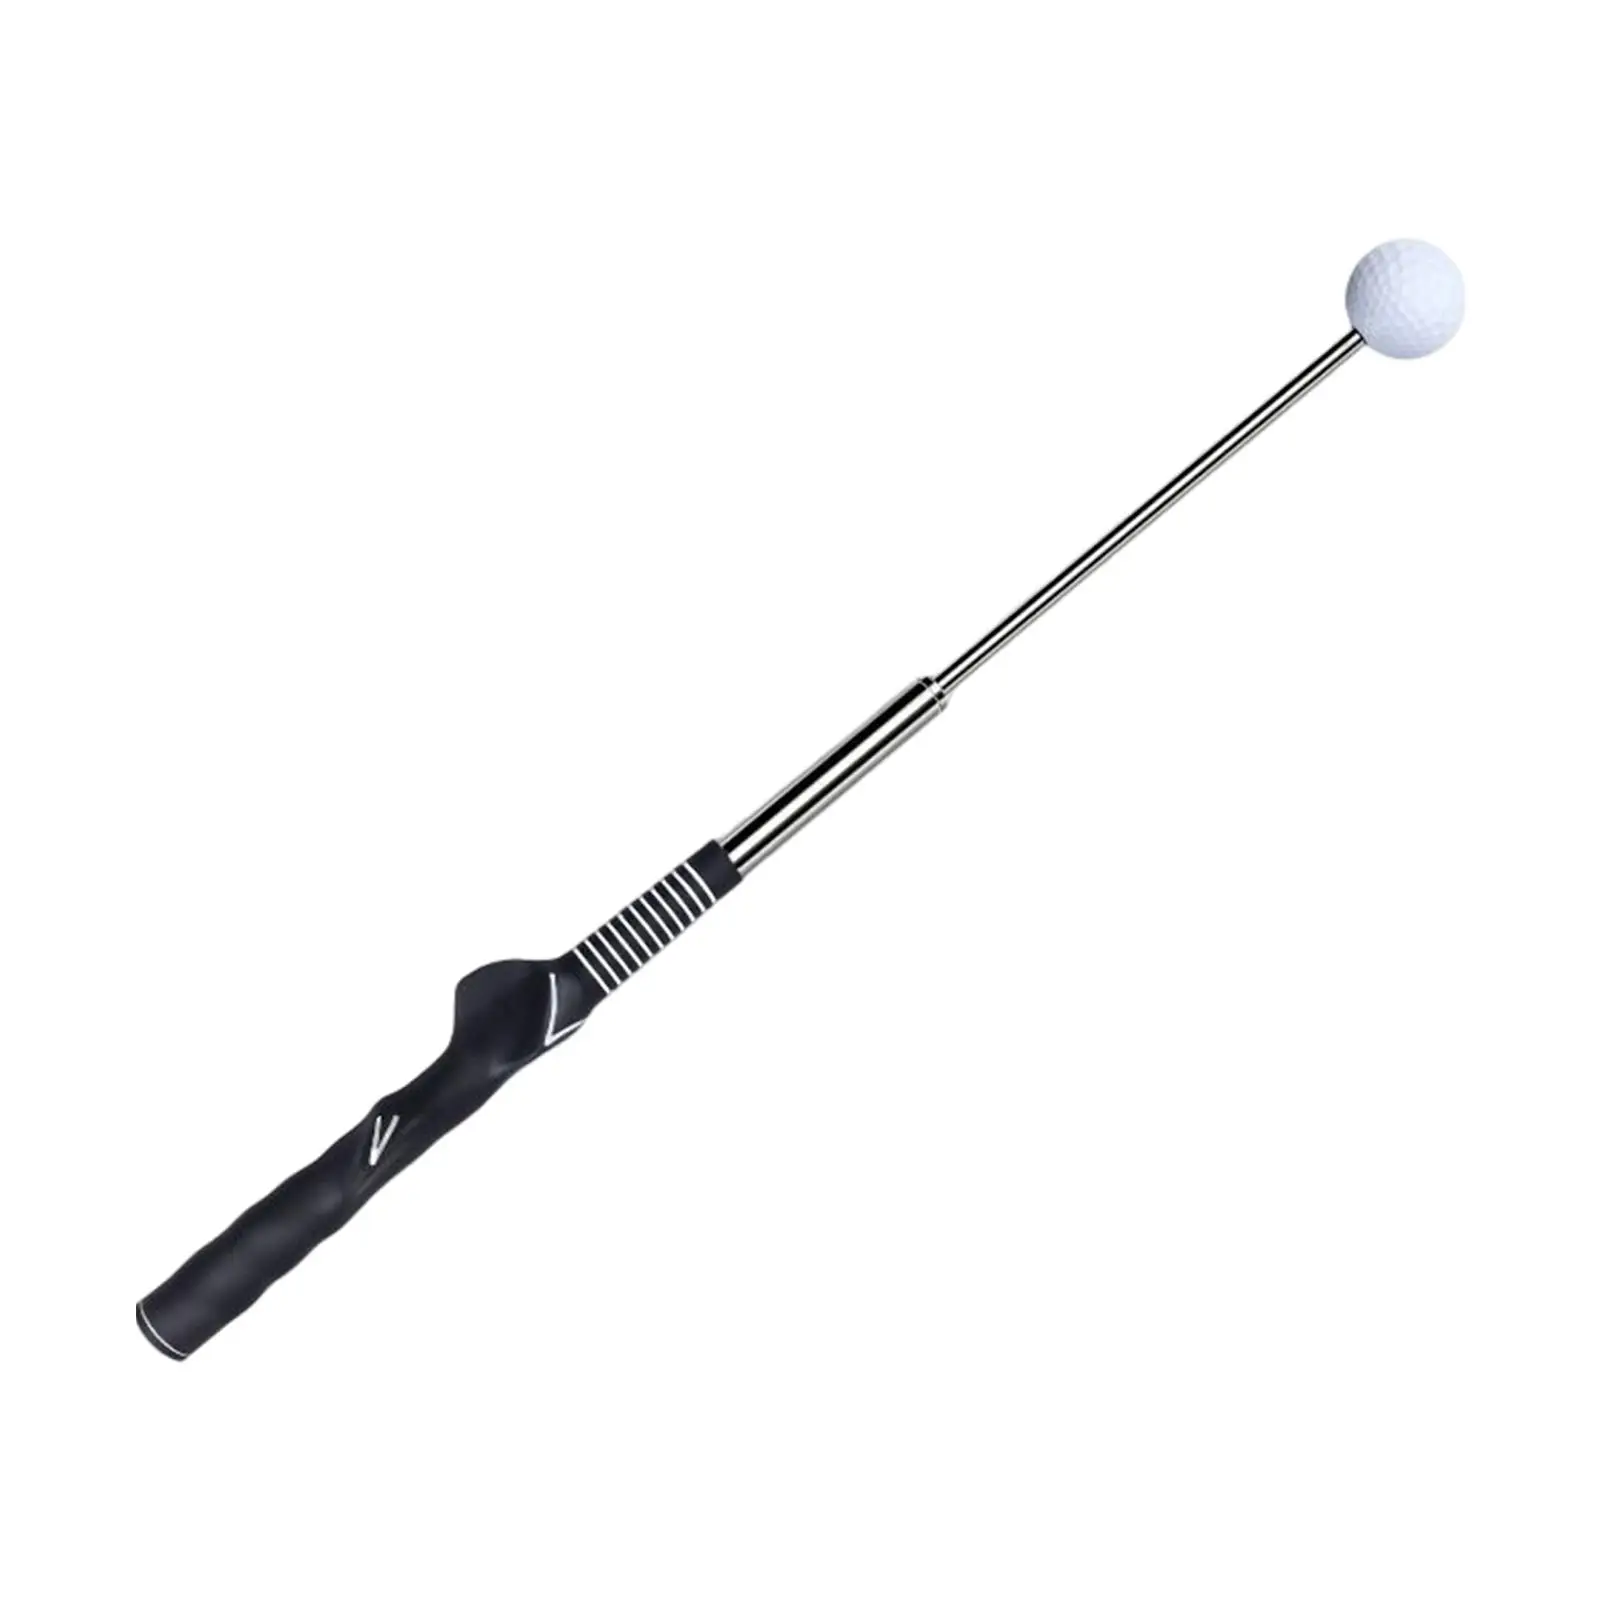 

Lightweight Telescopic Warm up Stick Practice Exercise Golf Swing Trainer Aid for Flexibility Improved Tempo Strength Balance